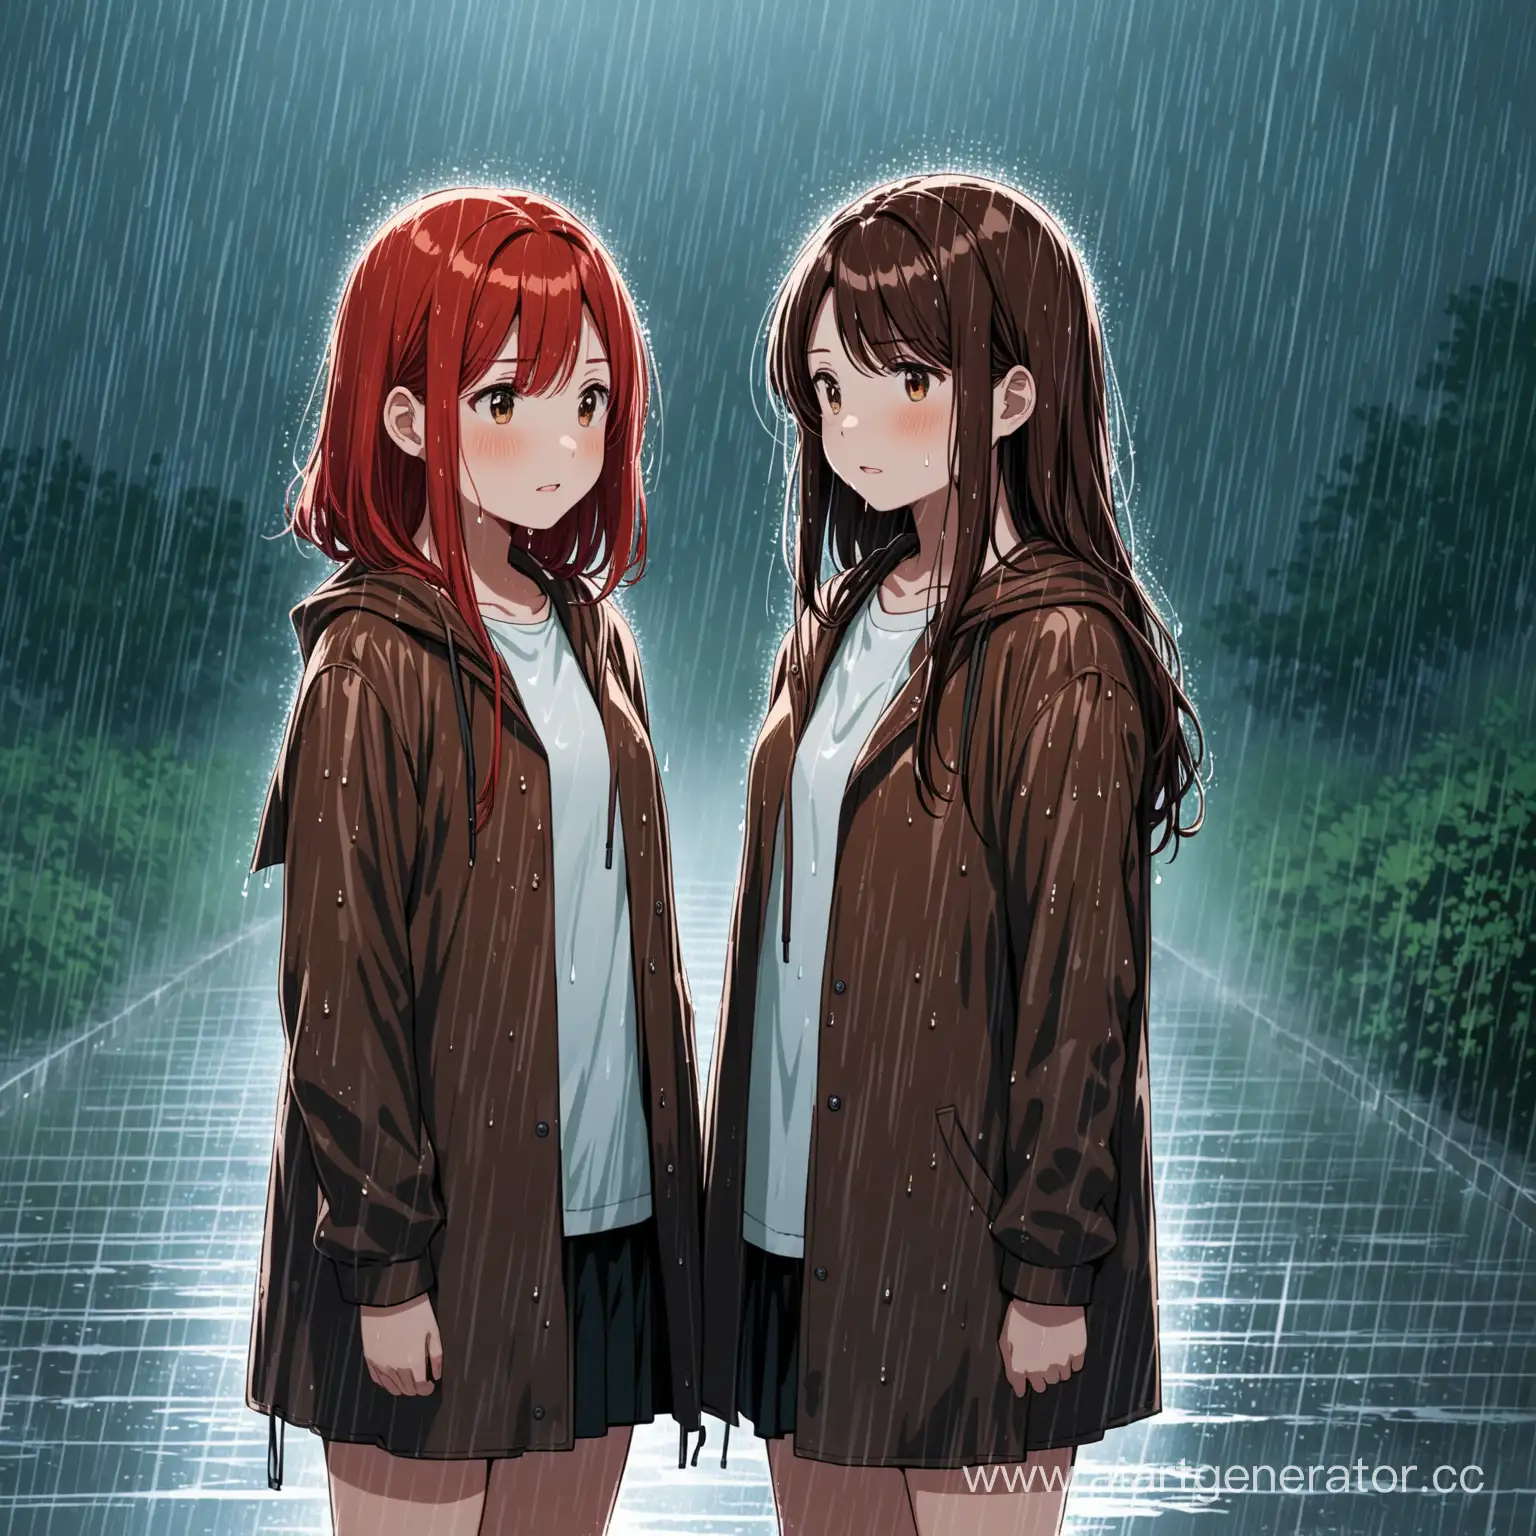 Two-Girls-Standing-in-the-Rain-Redhead-and-Brunette-in-Rainy-Day-Scene